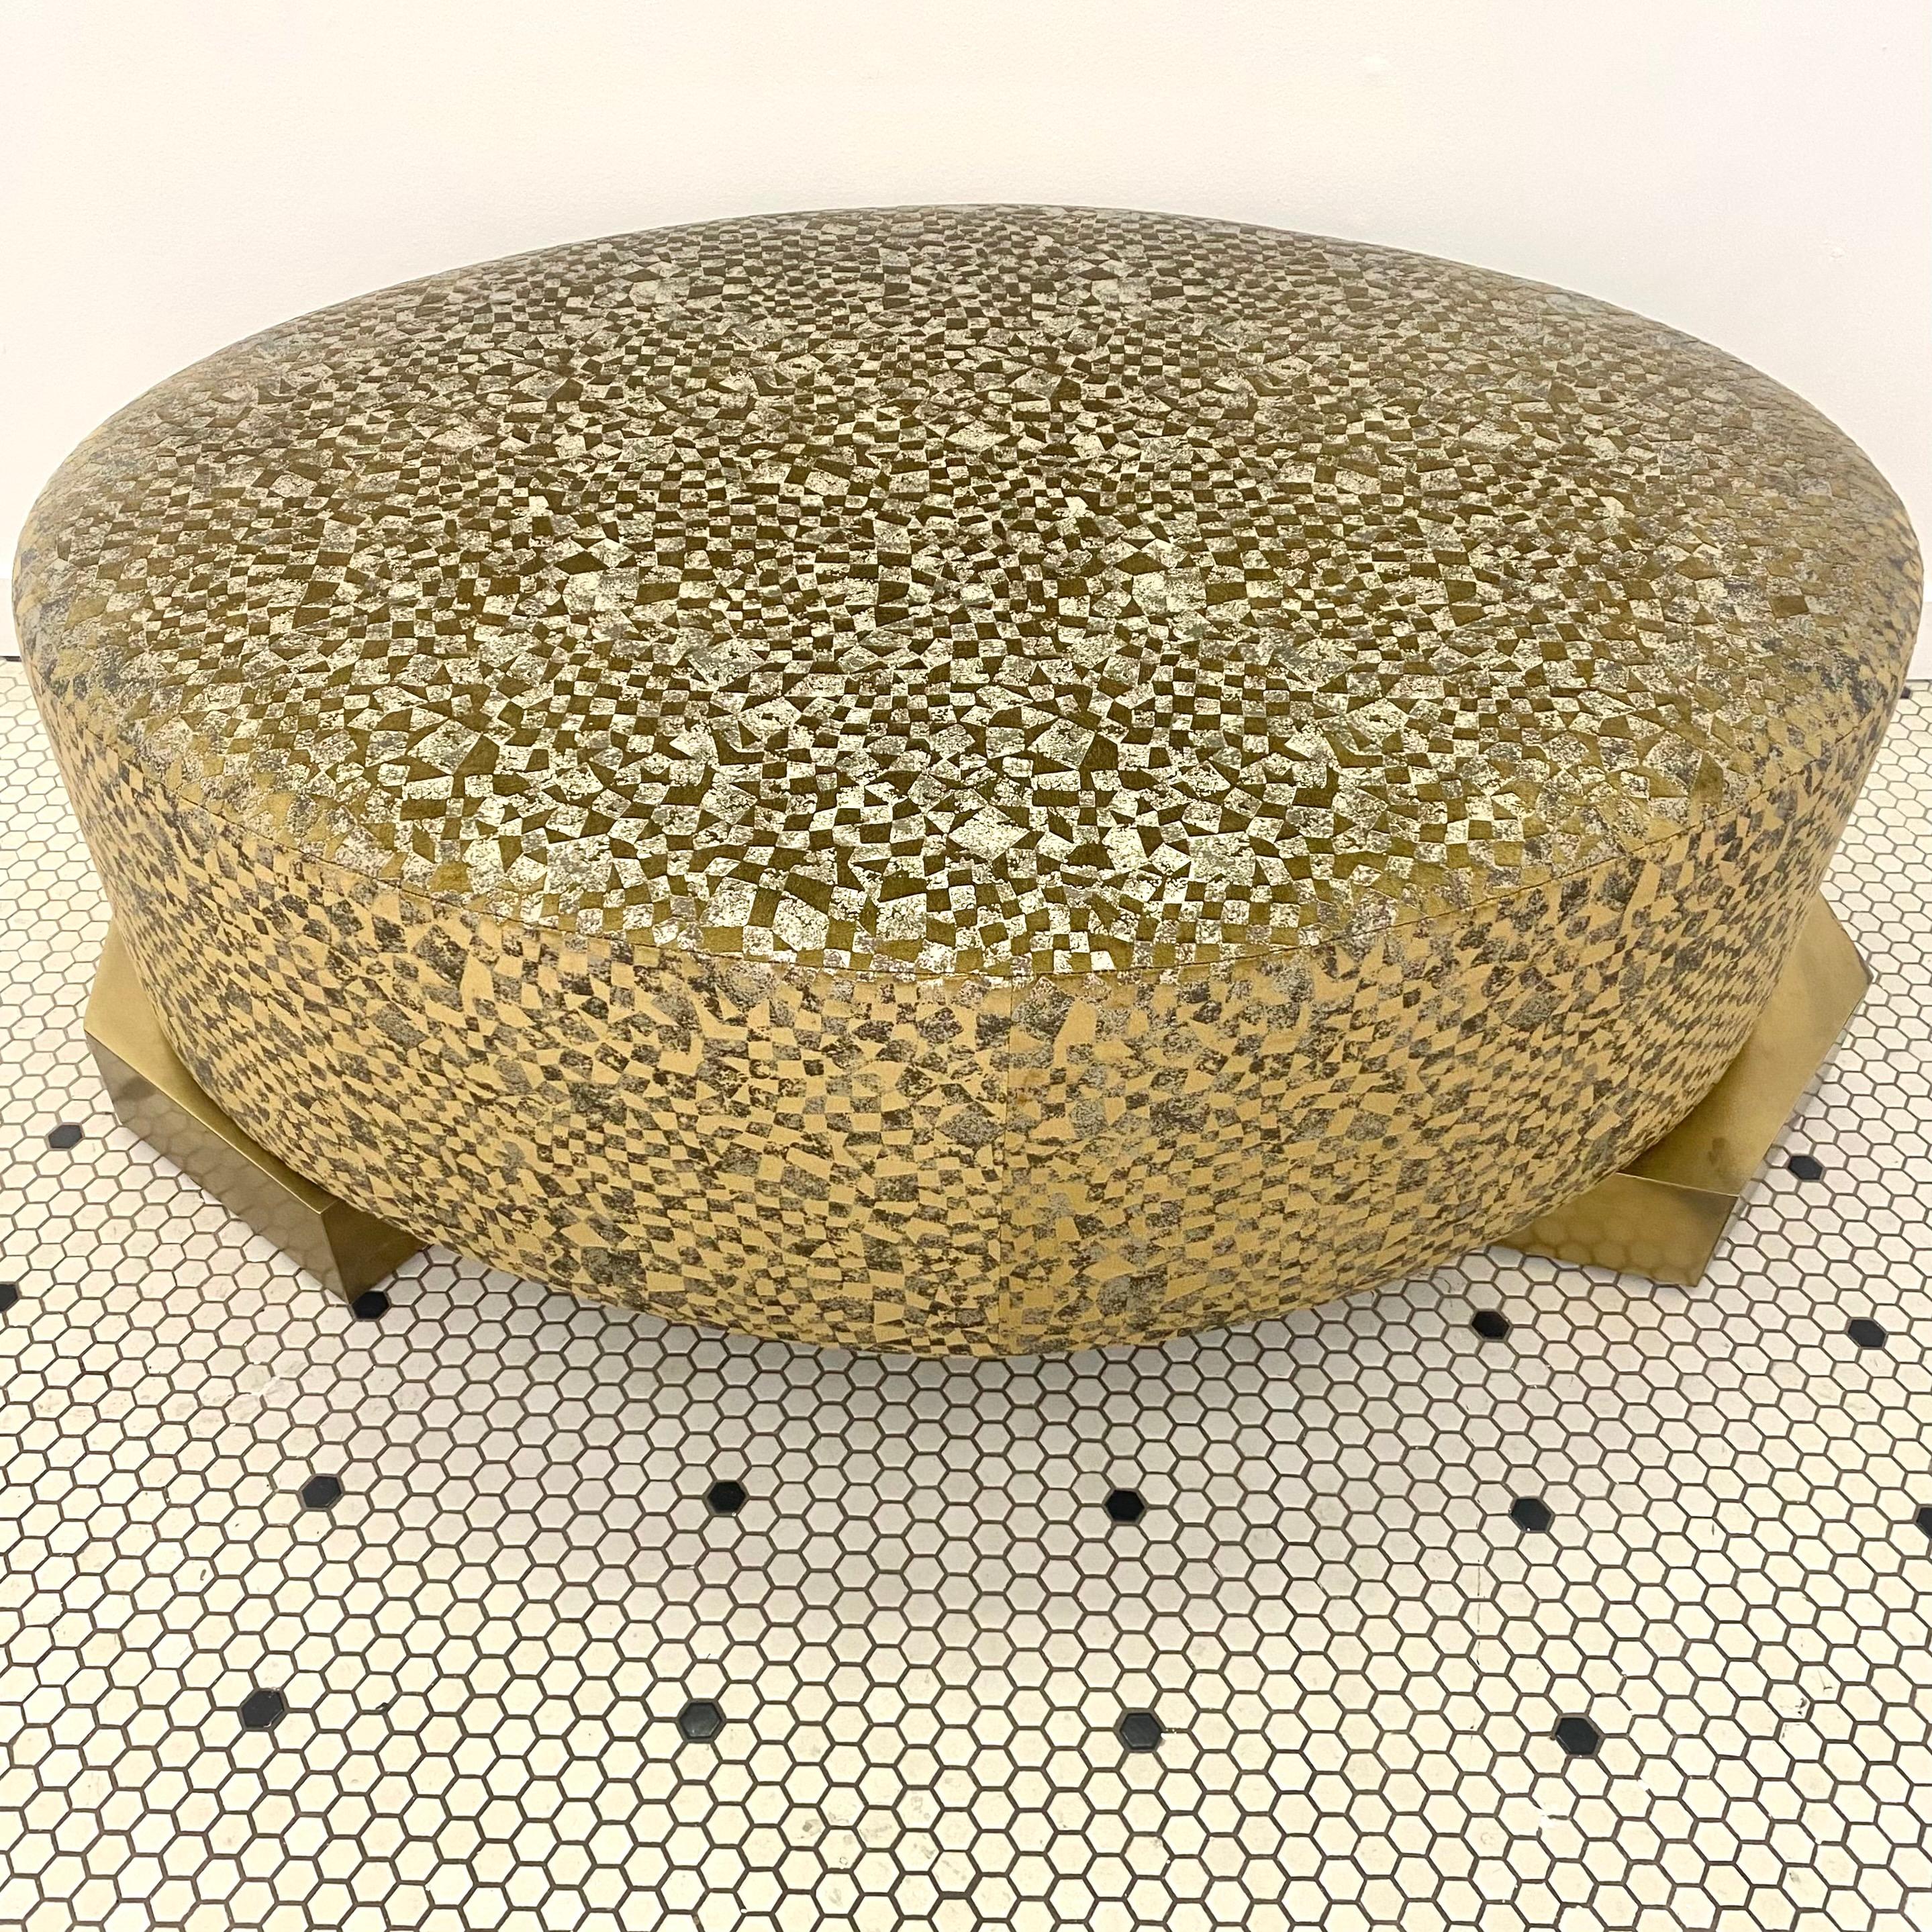 This stunning ottoman features a metallic mosaic fabric stretched to form a robust oval. The pouf cushion sturdily sits atop two asymmetrical, geometrical wood feet clad in brass. Light reflects off of the patterned fabric, and shifts in depth and